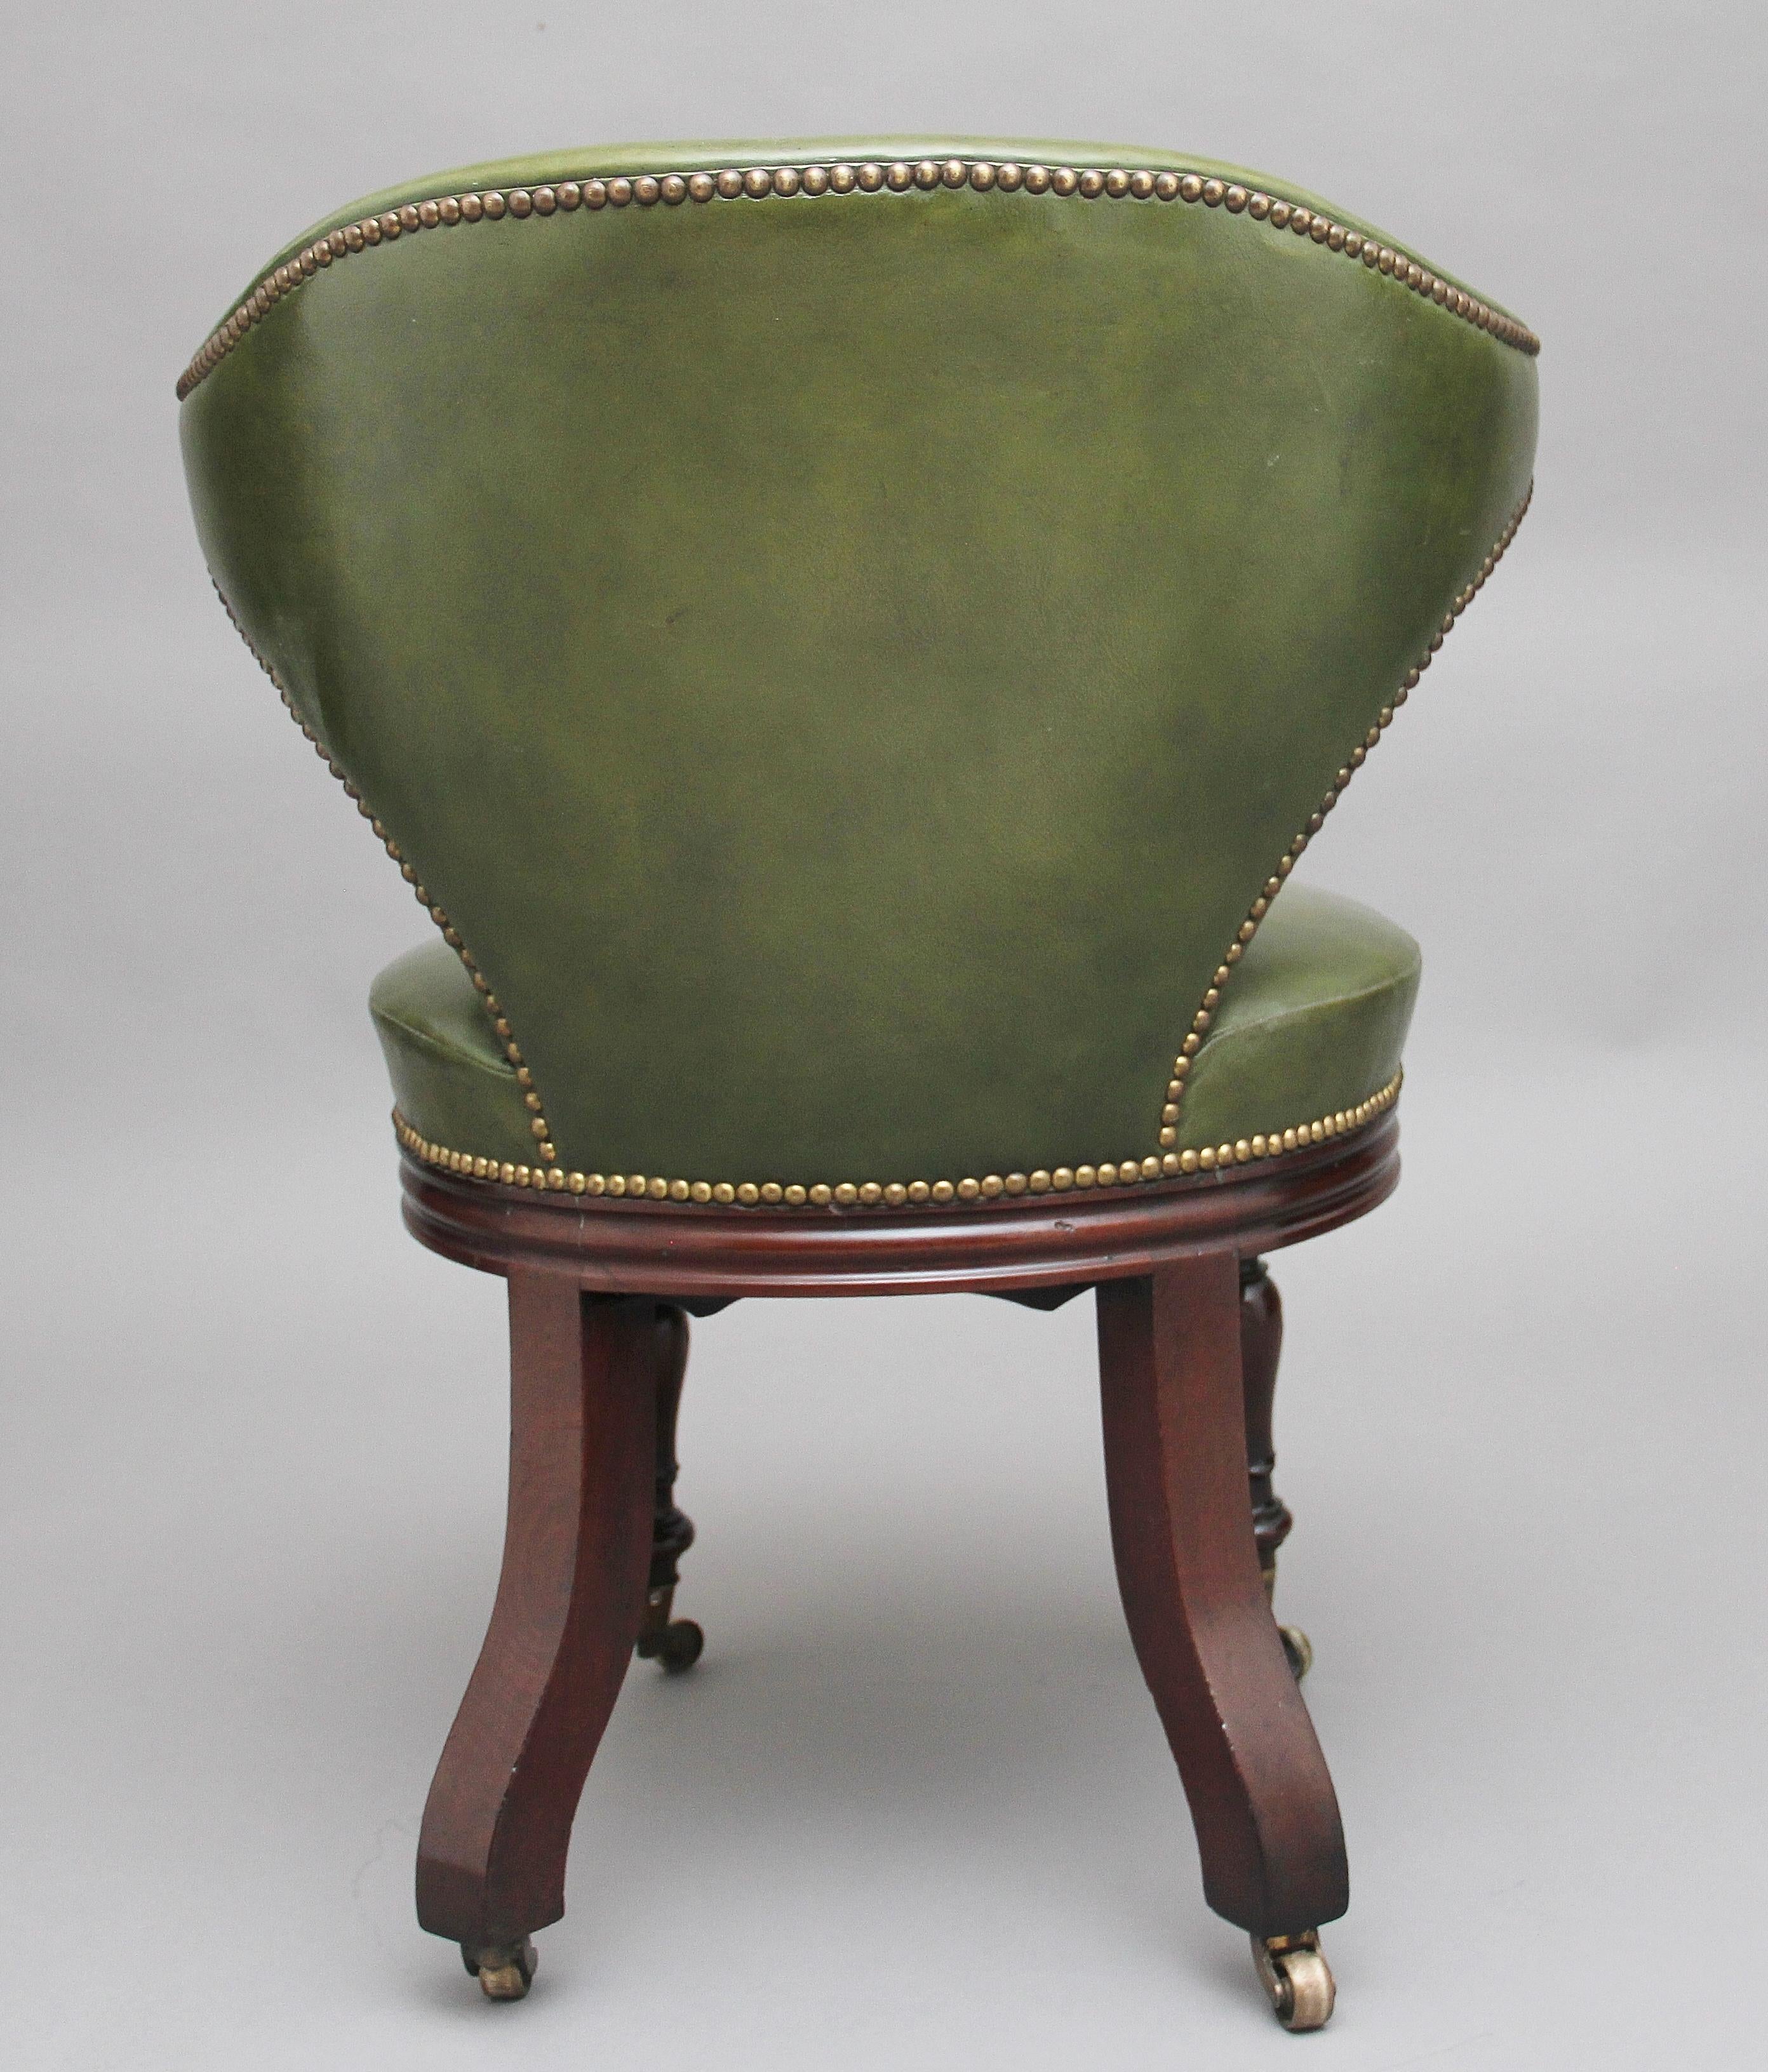 British 19th Century Mahogany and Green Leather Desk Chair